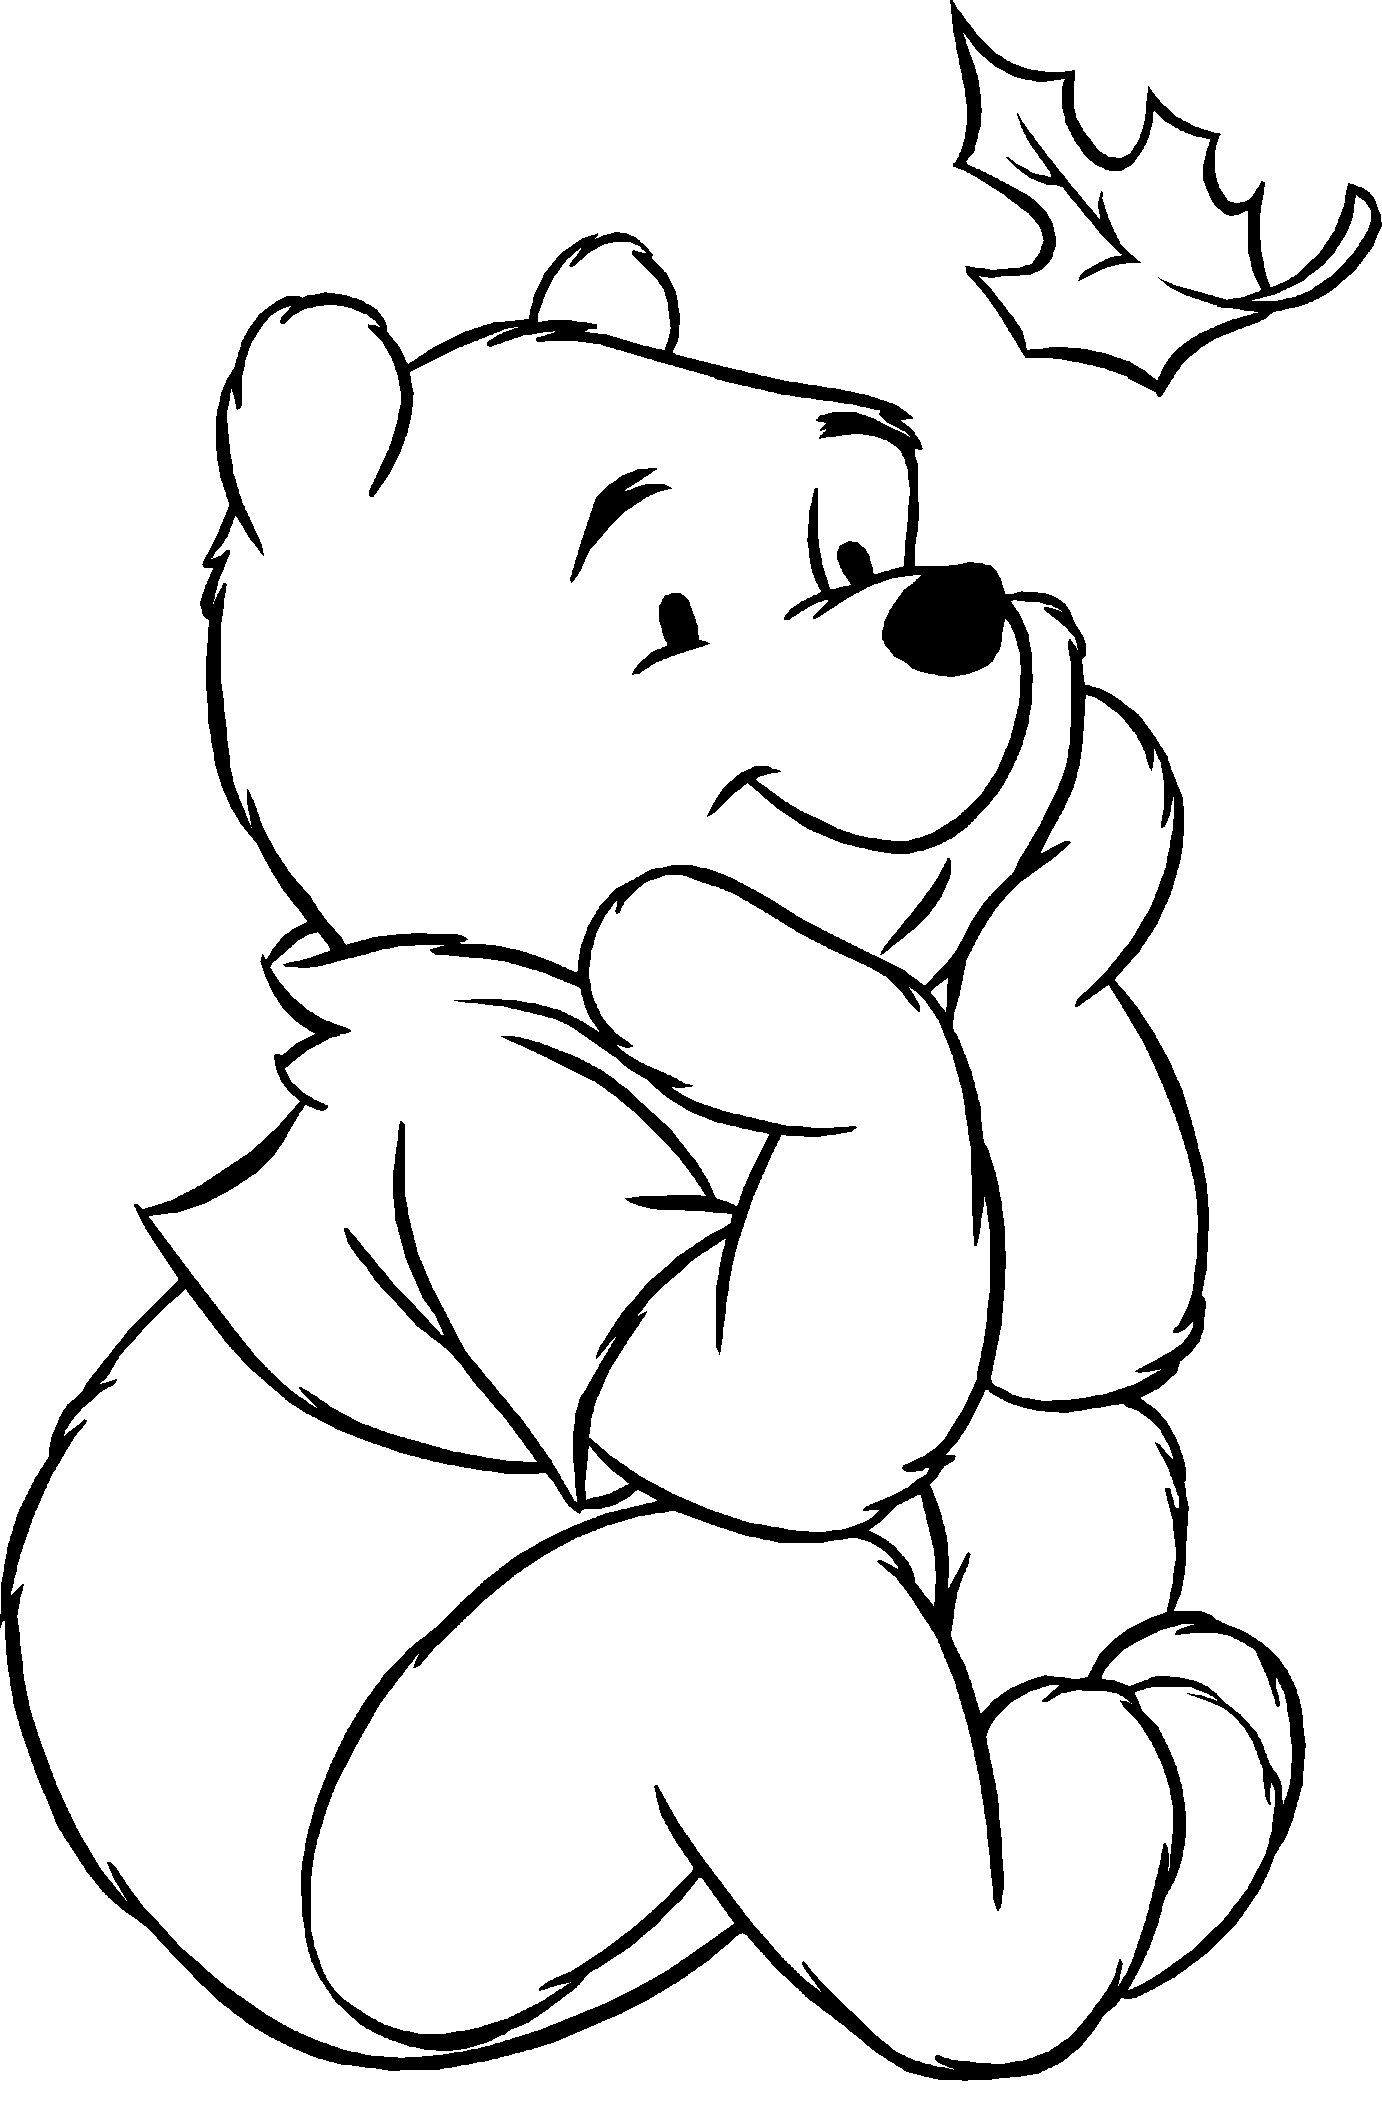 Coloring Sheets For Boys Disney
 Disney Coloring Pages For Boys